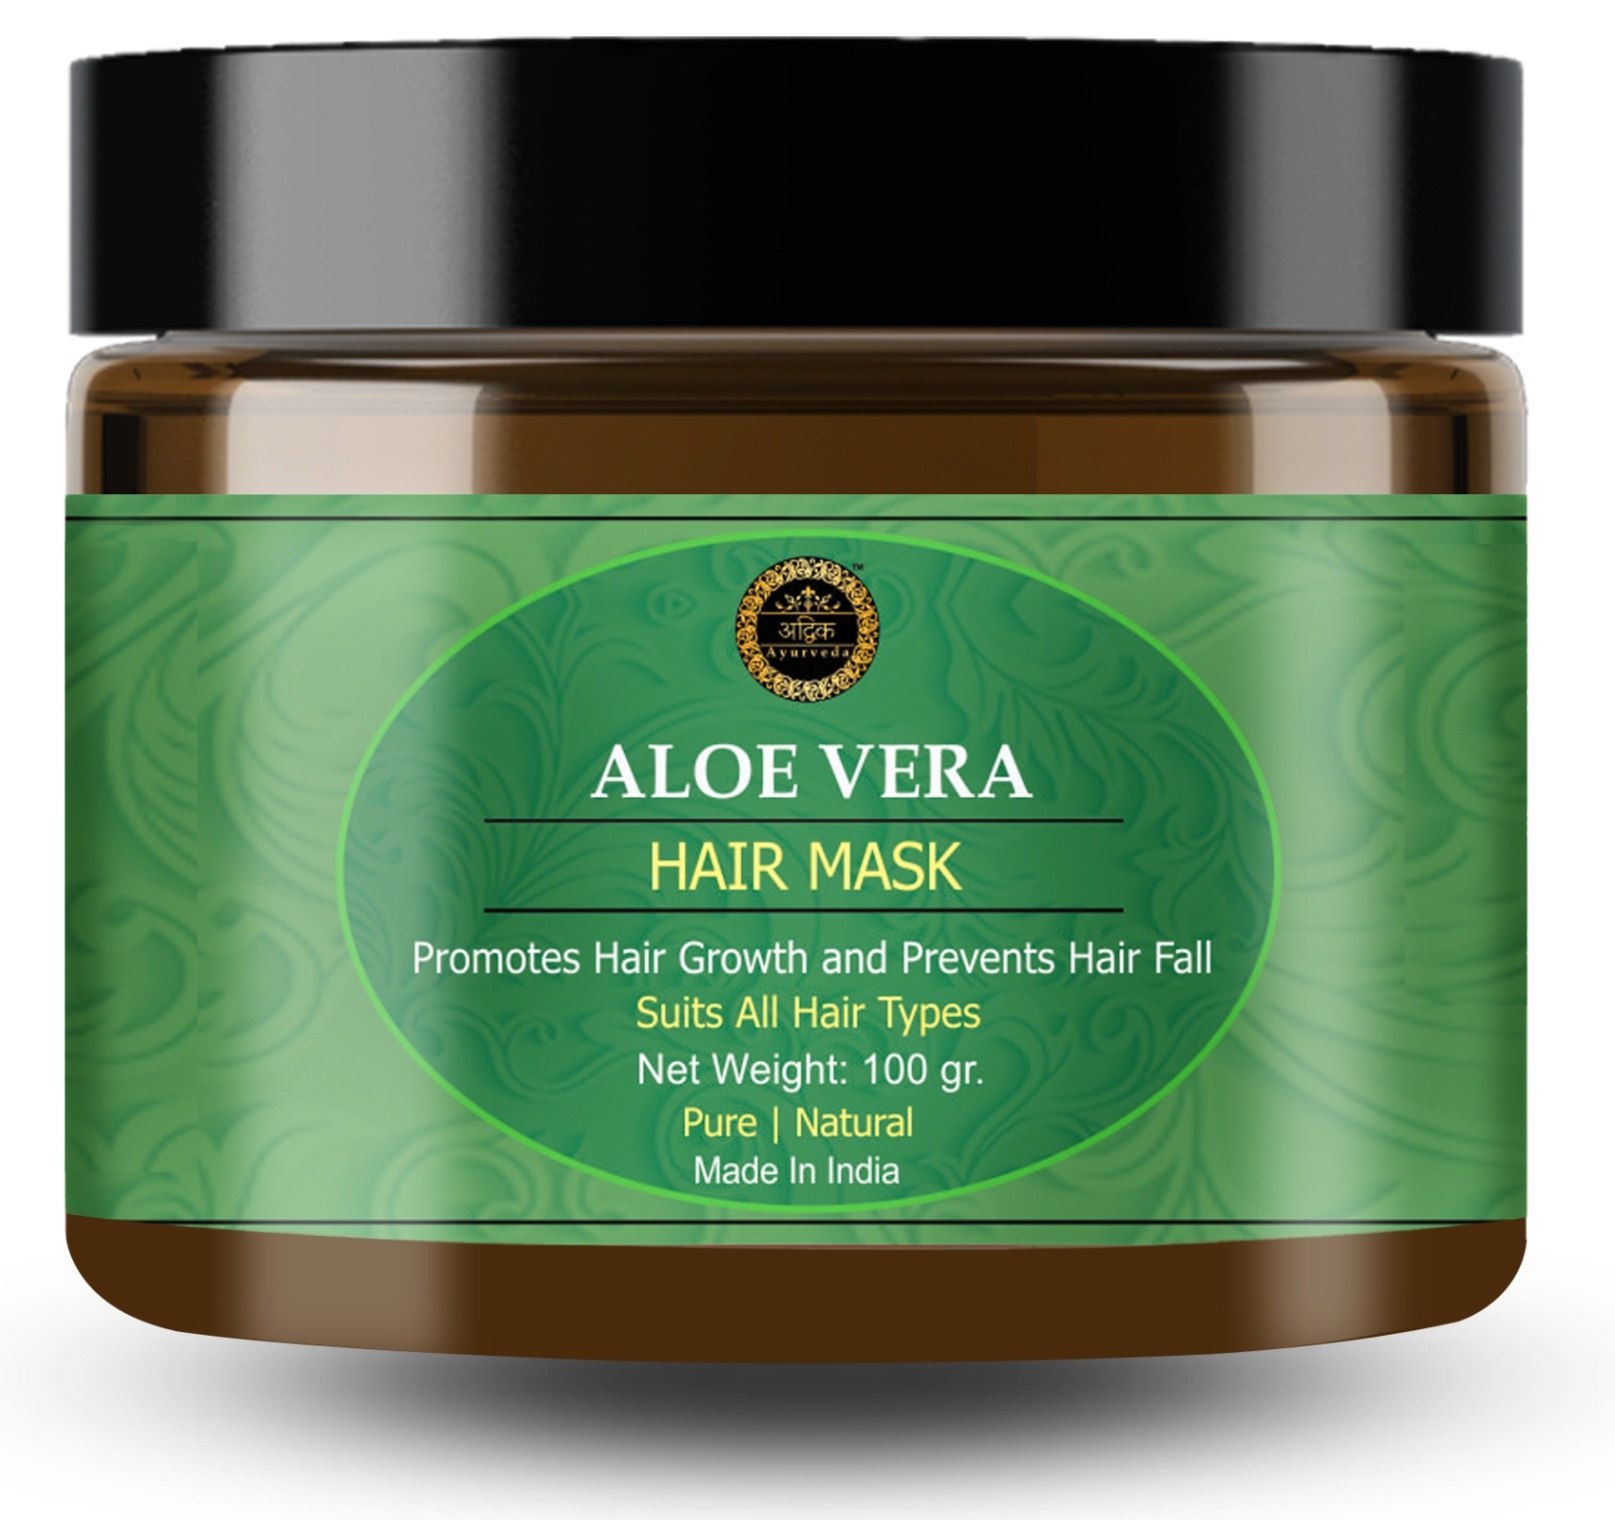 Experience Smooth, Frizz-Free Hair with Aloe Vera Hair Mask